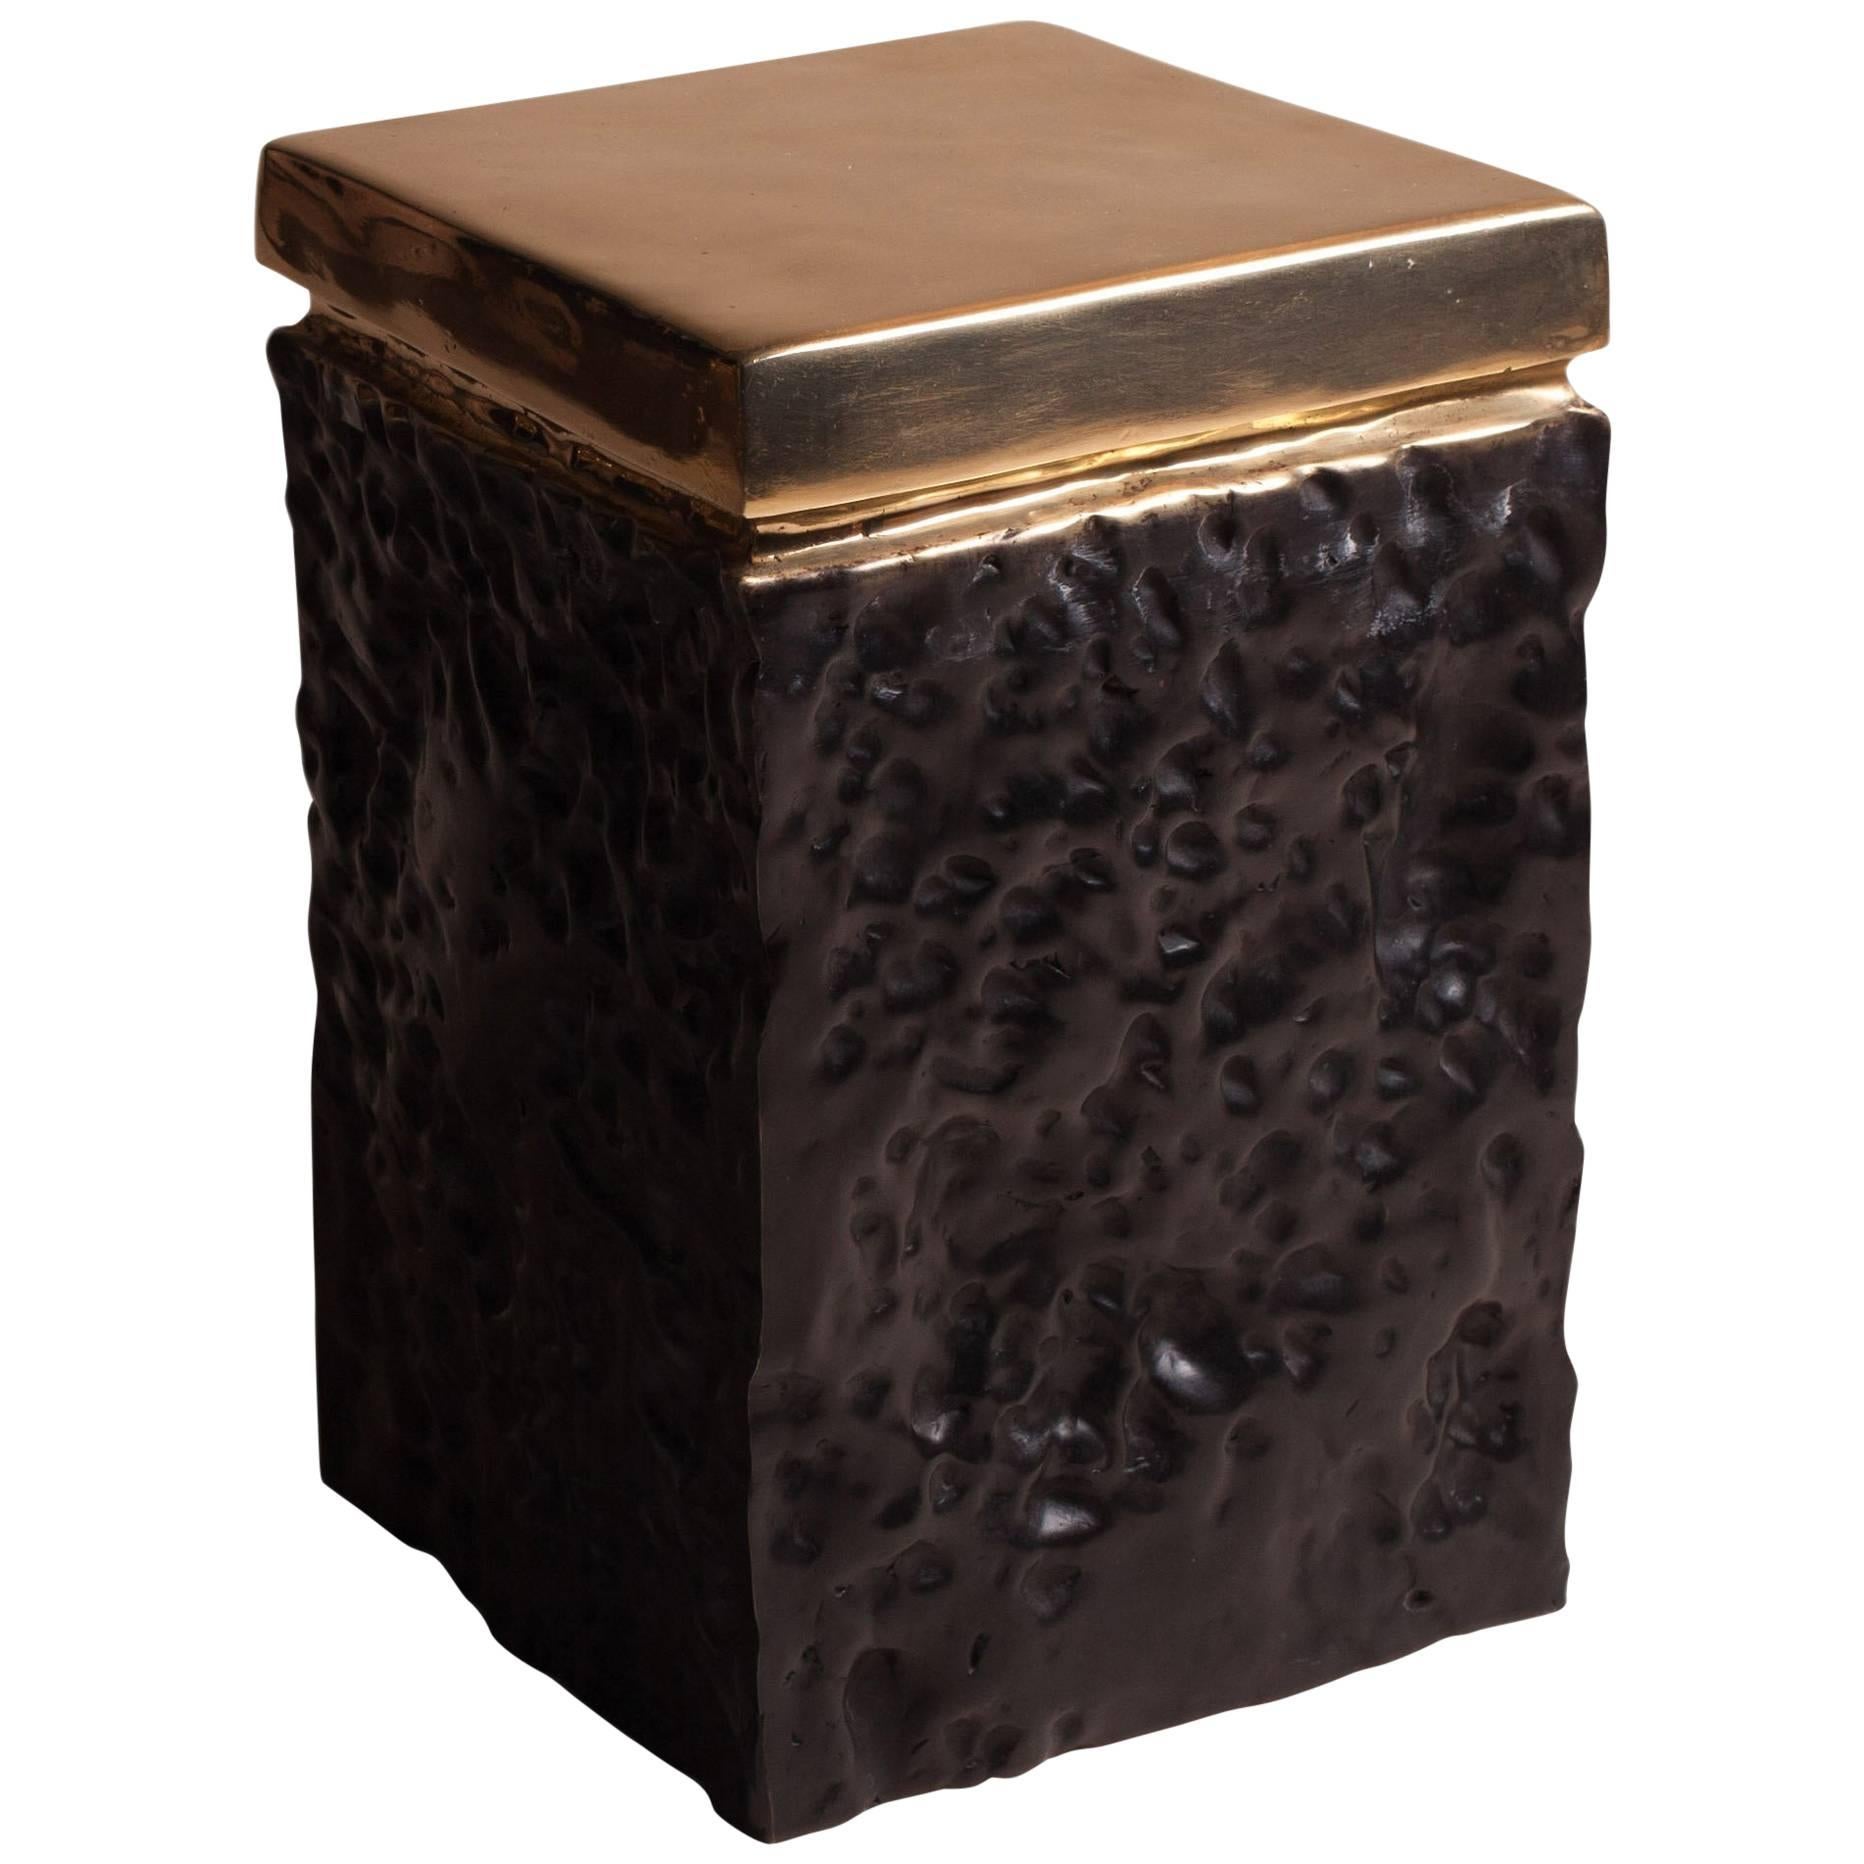 Bronze Hand Casted Side Table or Stool by Studio Goldwood